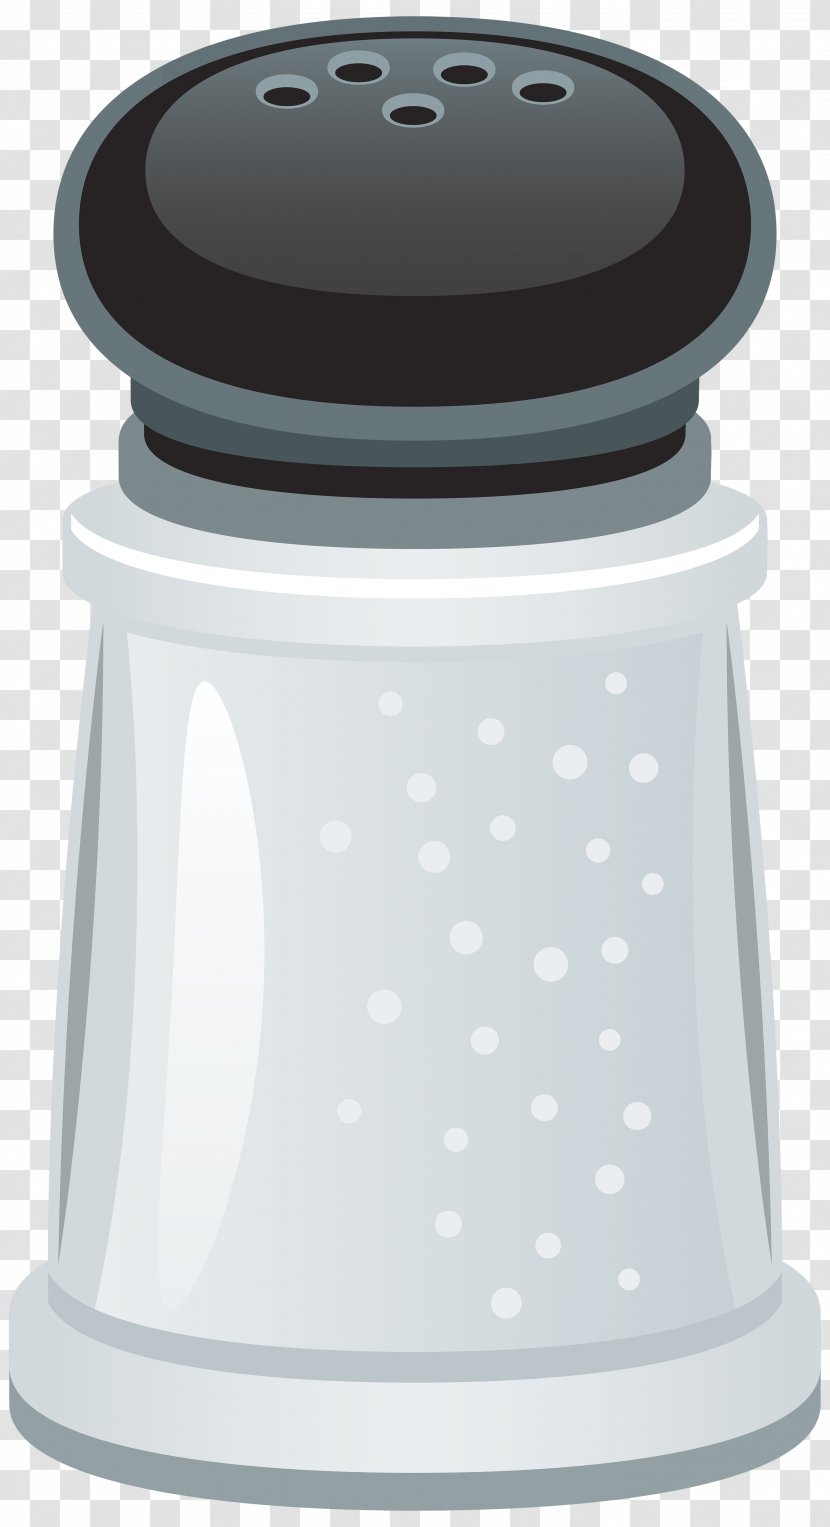 Salt Transparency And Translucency Cocktail Shaker Clip Art - Small Appliance Transparent PNG